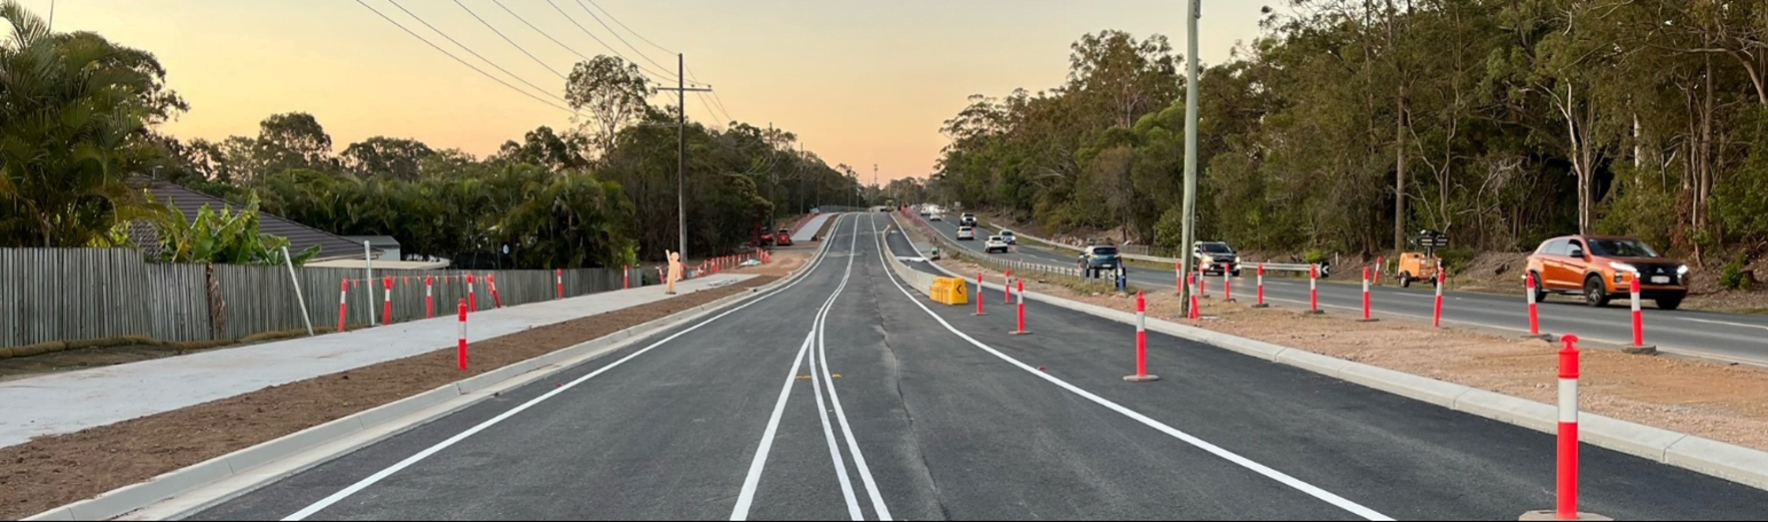 Image for WELLINGTON STREET / PANORAMA DRIVE ROAD UPGRADE PROGRAM (STAGE 1)